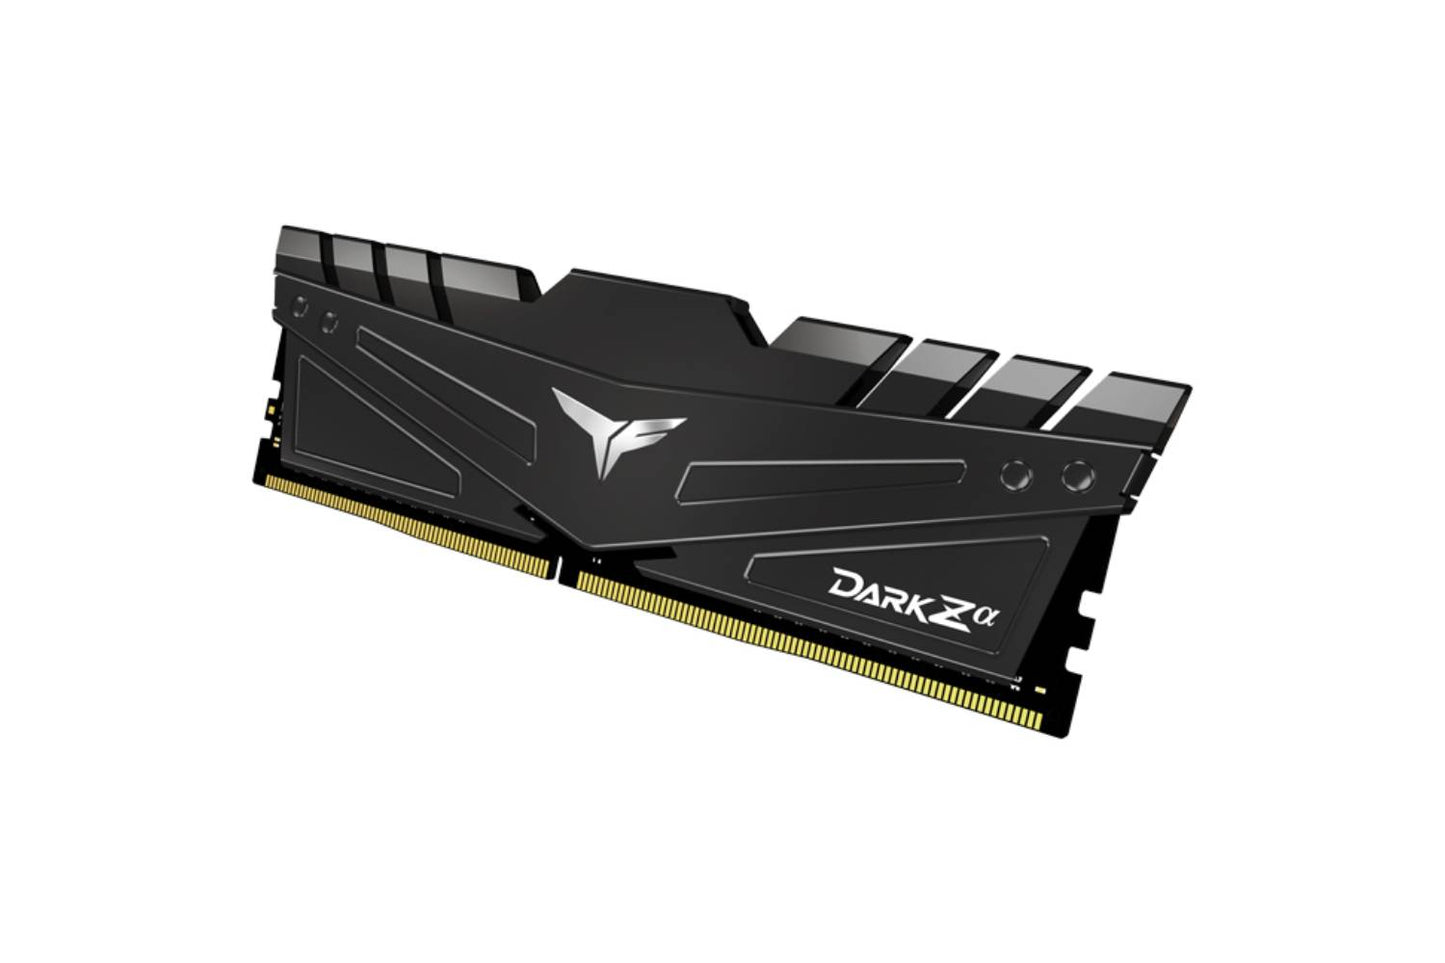 T-force DARK Zα DDR4 GAMING MEMORY (FOR AMD) (8GB x 2) 16GB Gaming Memory